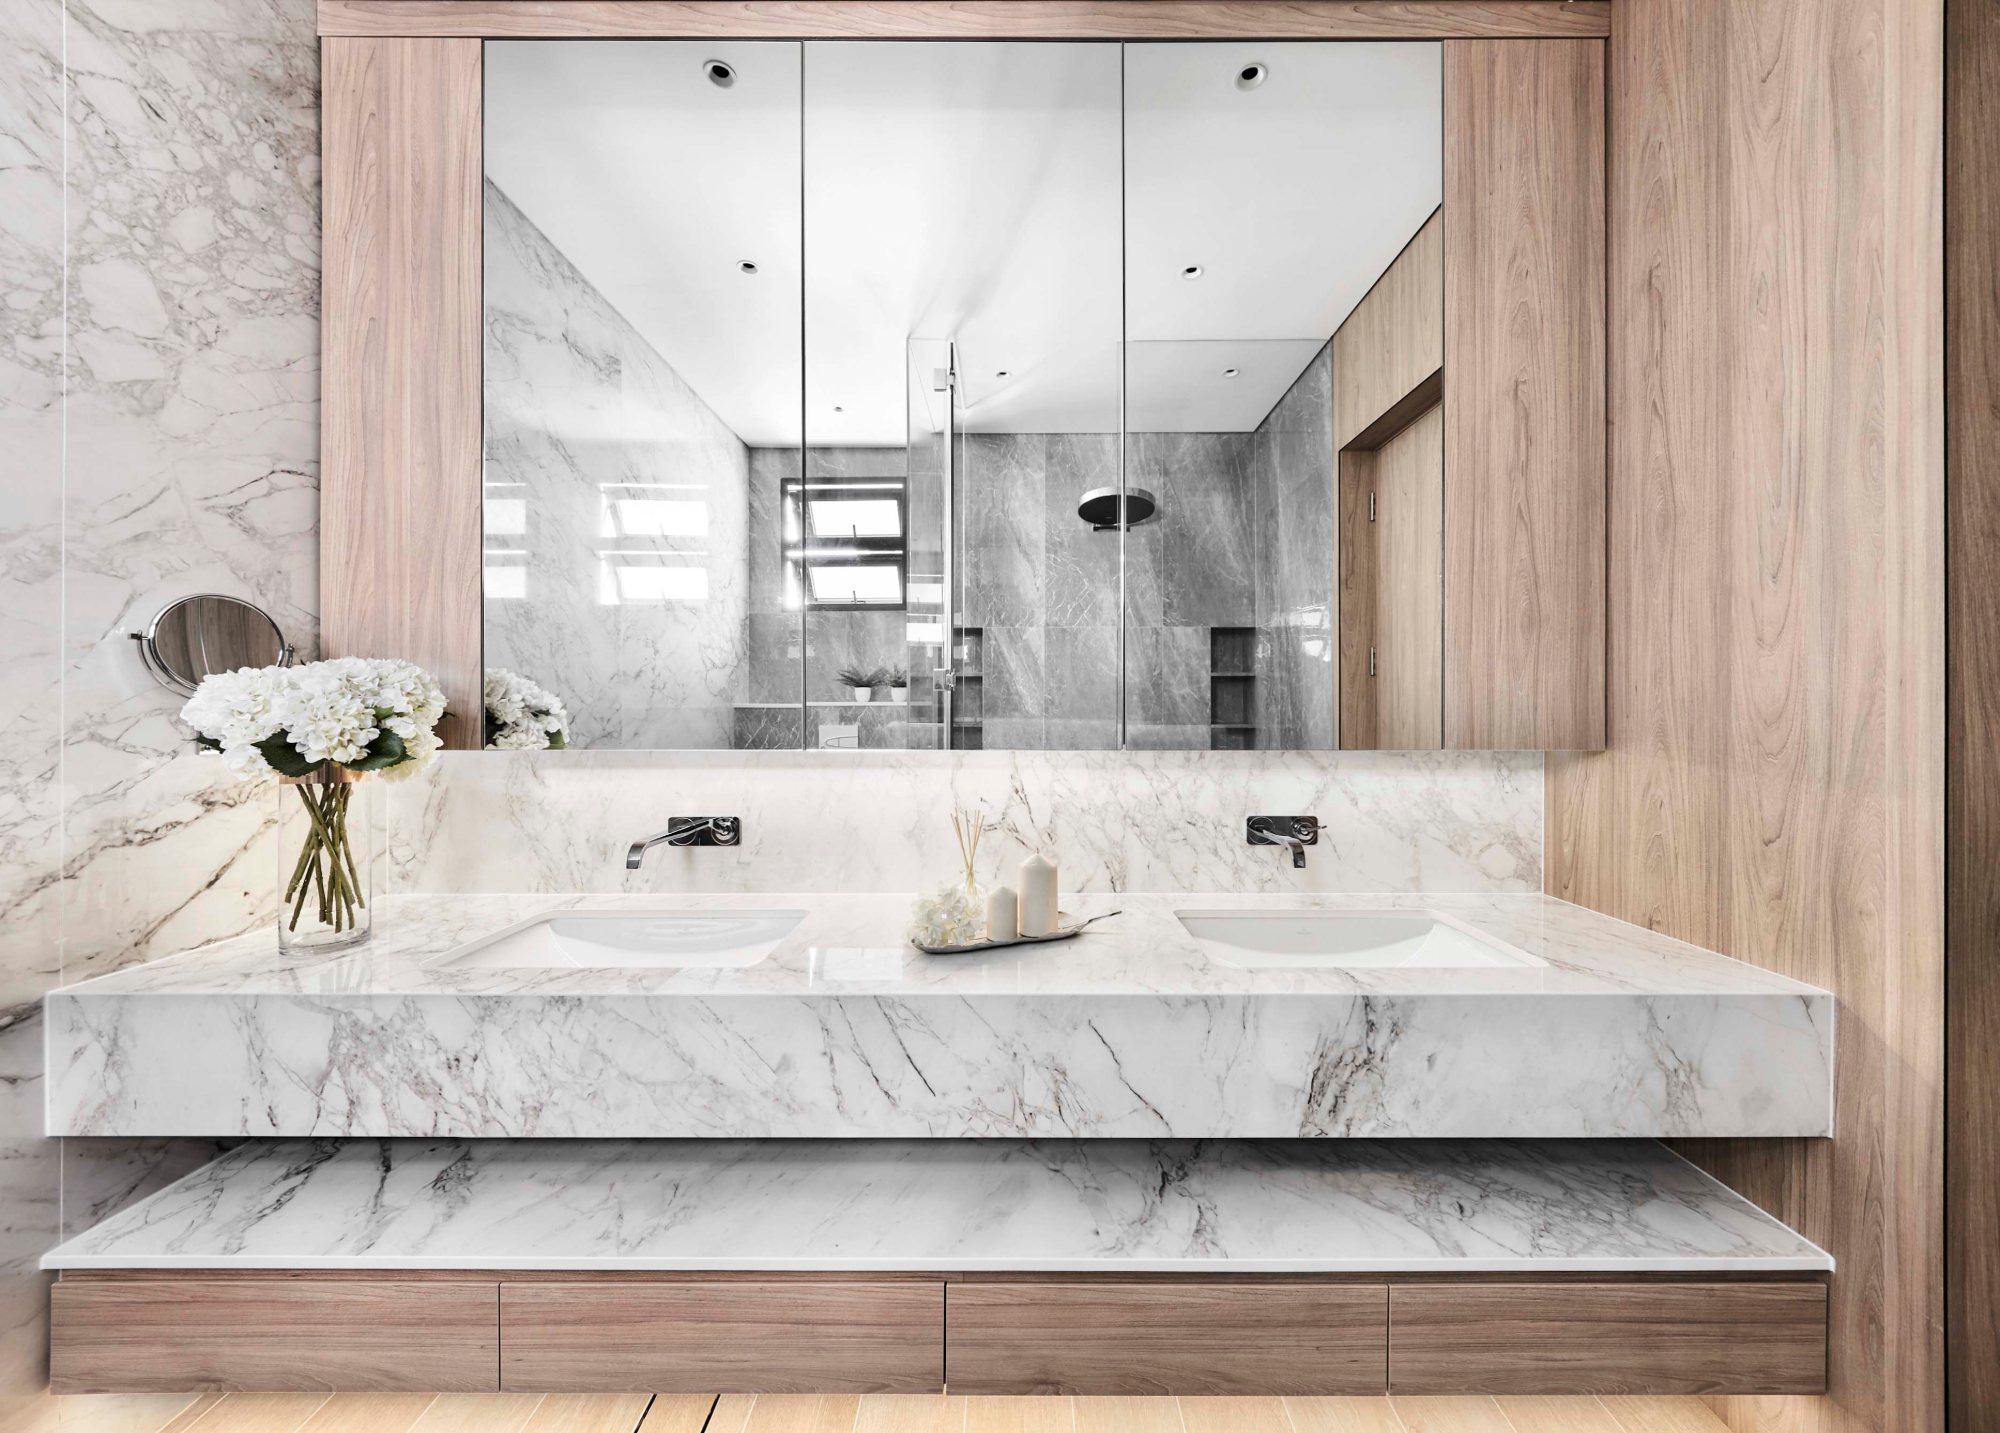 Image of Master Bathroom 1 in A house full of elegant and timeless contrasts - Cosentino